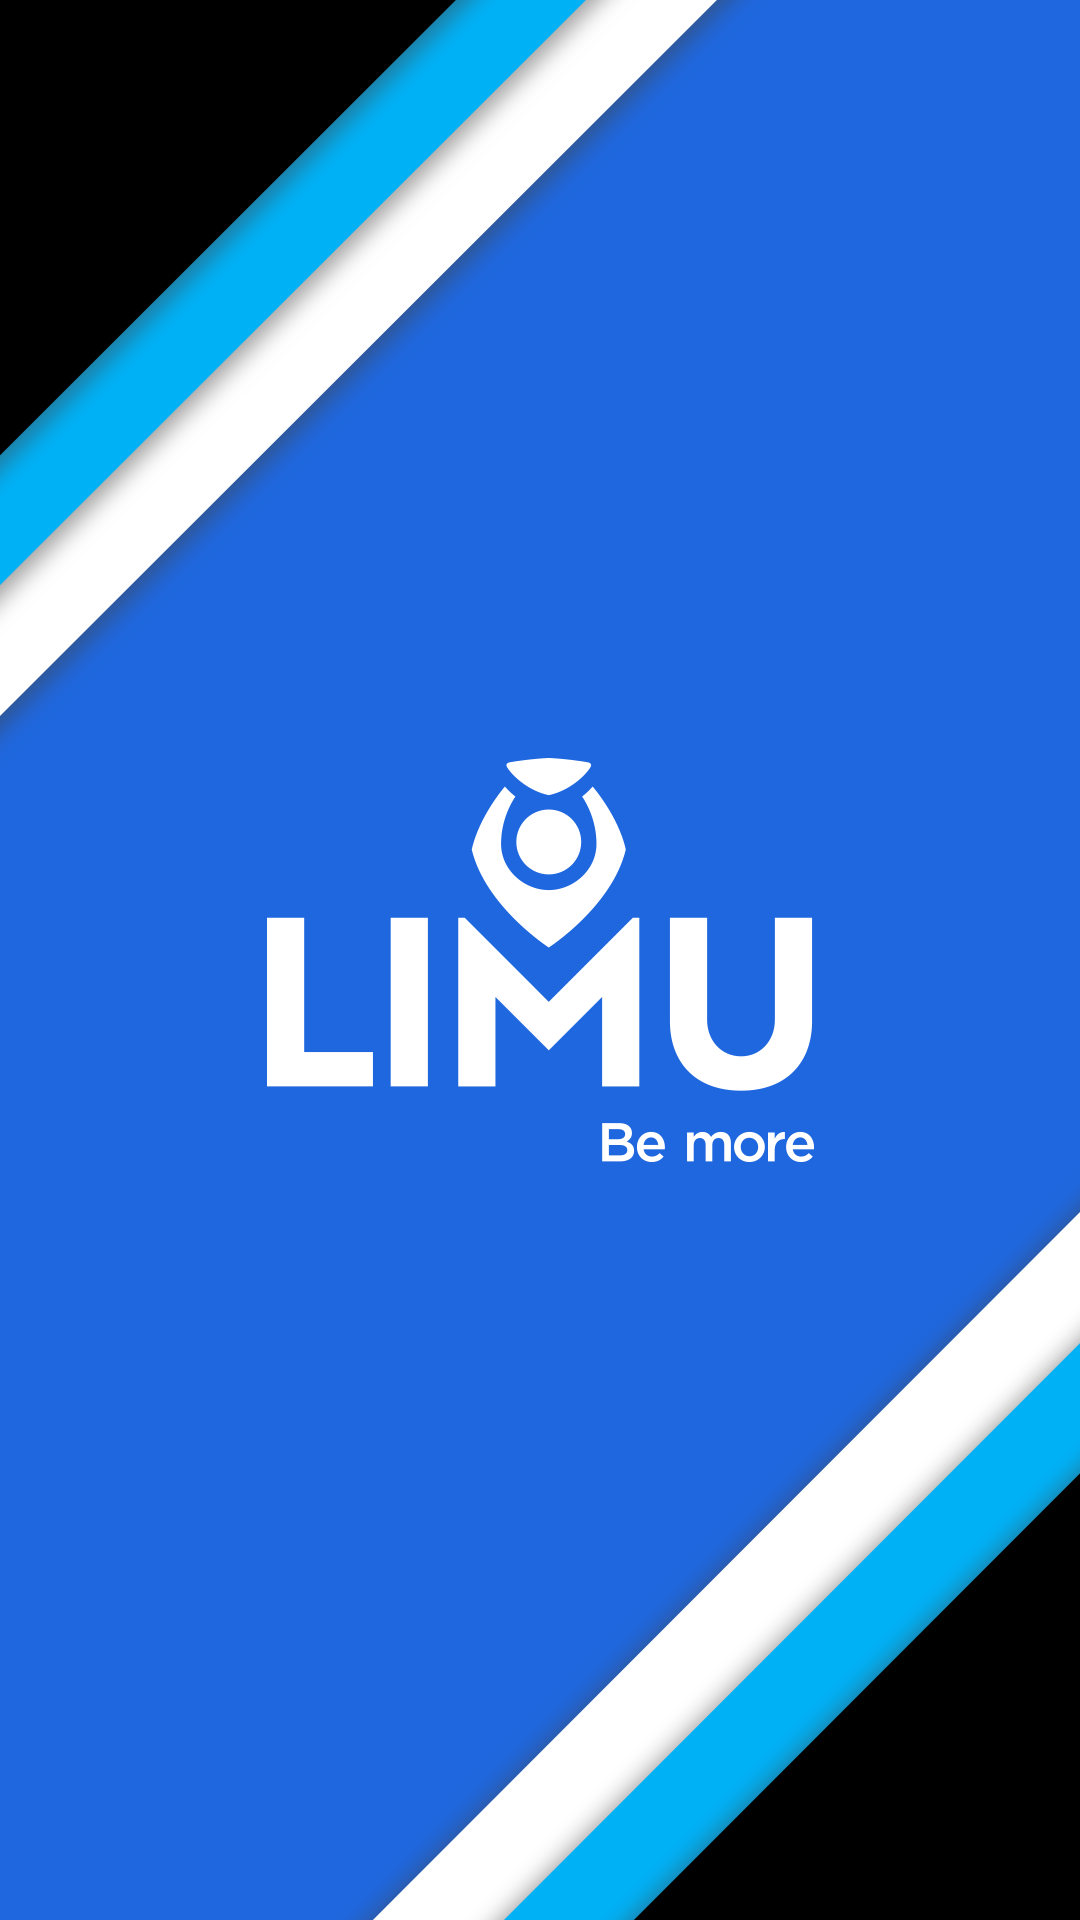 Mobile Motivation: 15+ Free LIMU Cell Phone Wallpapers